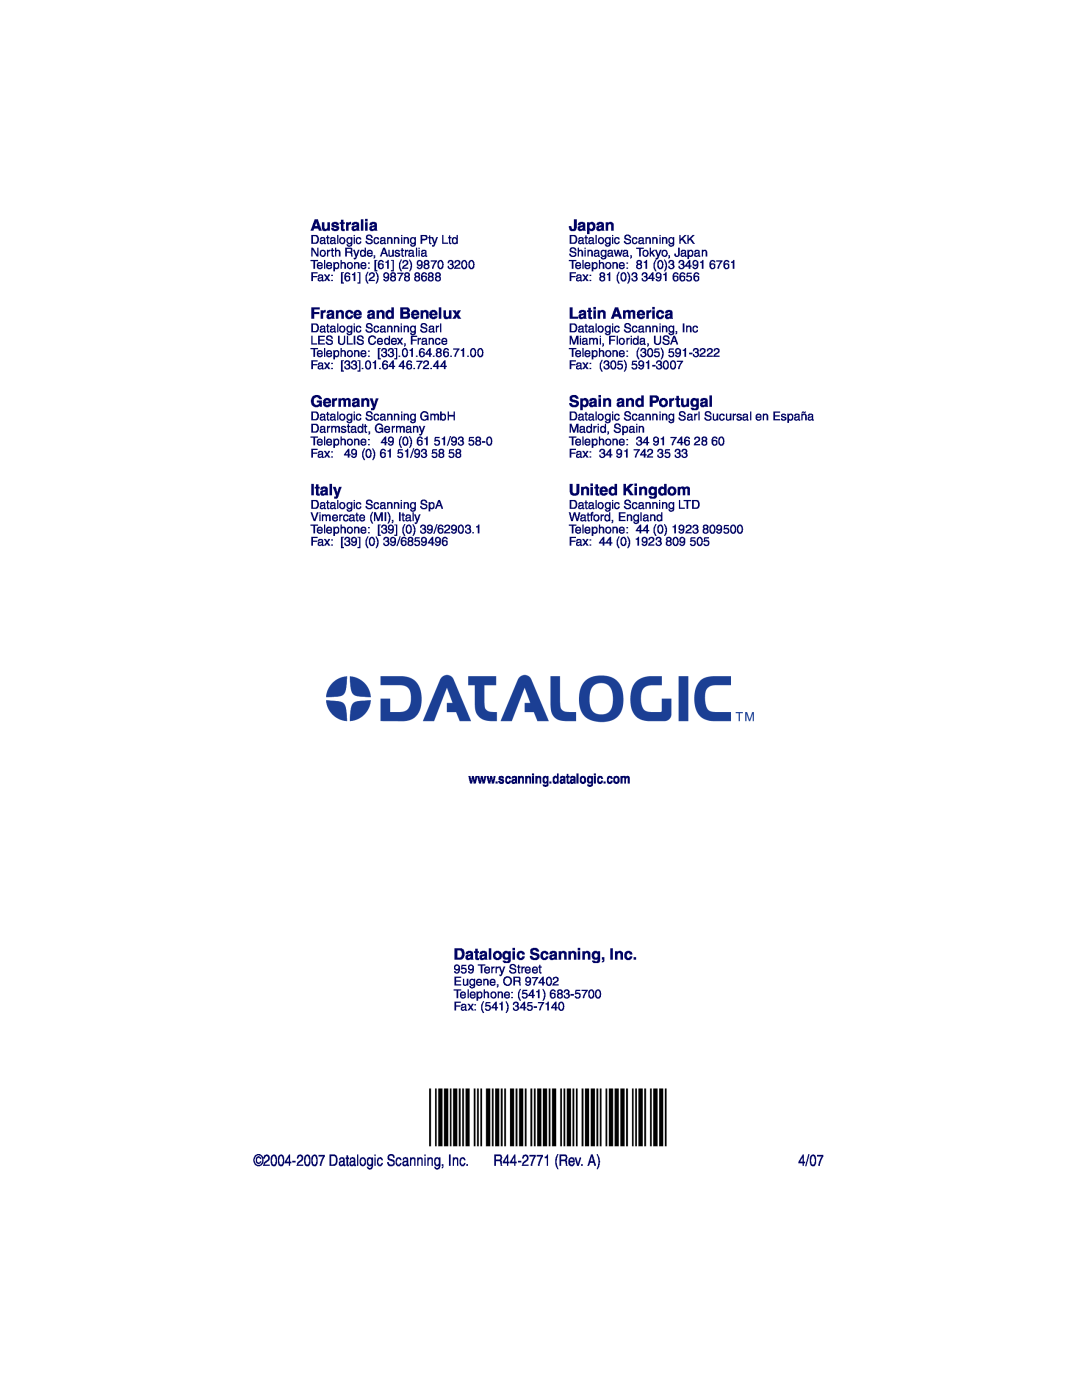 Datalogic Scanning SR, XLR Australia, Japan, France and Benelux, Latin America, Germany, Spain and Portugal, Italy, 4/07 